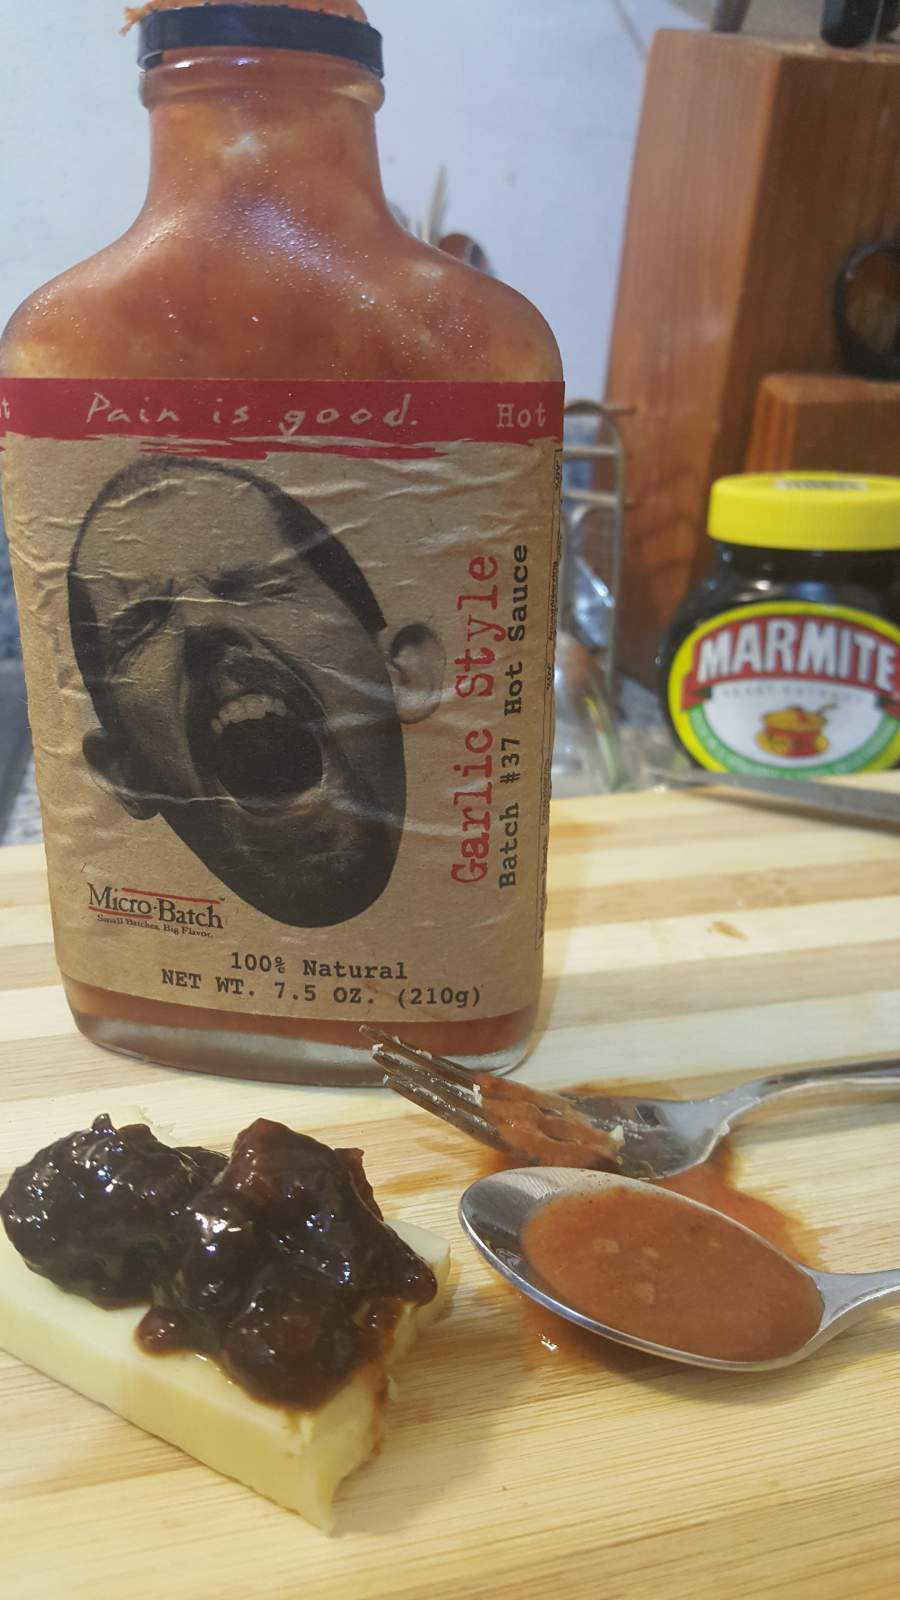 Pain is good Luisiana hot sauce - and a jar of Marmite